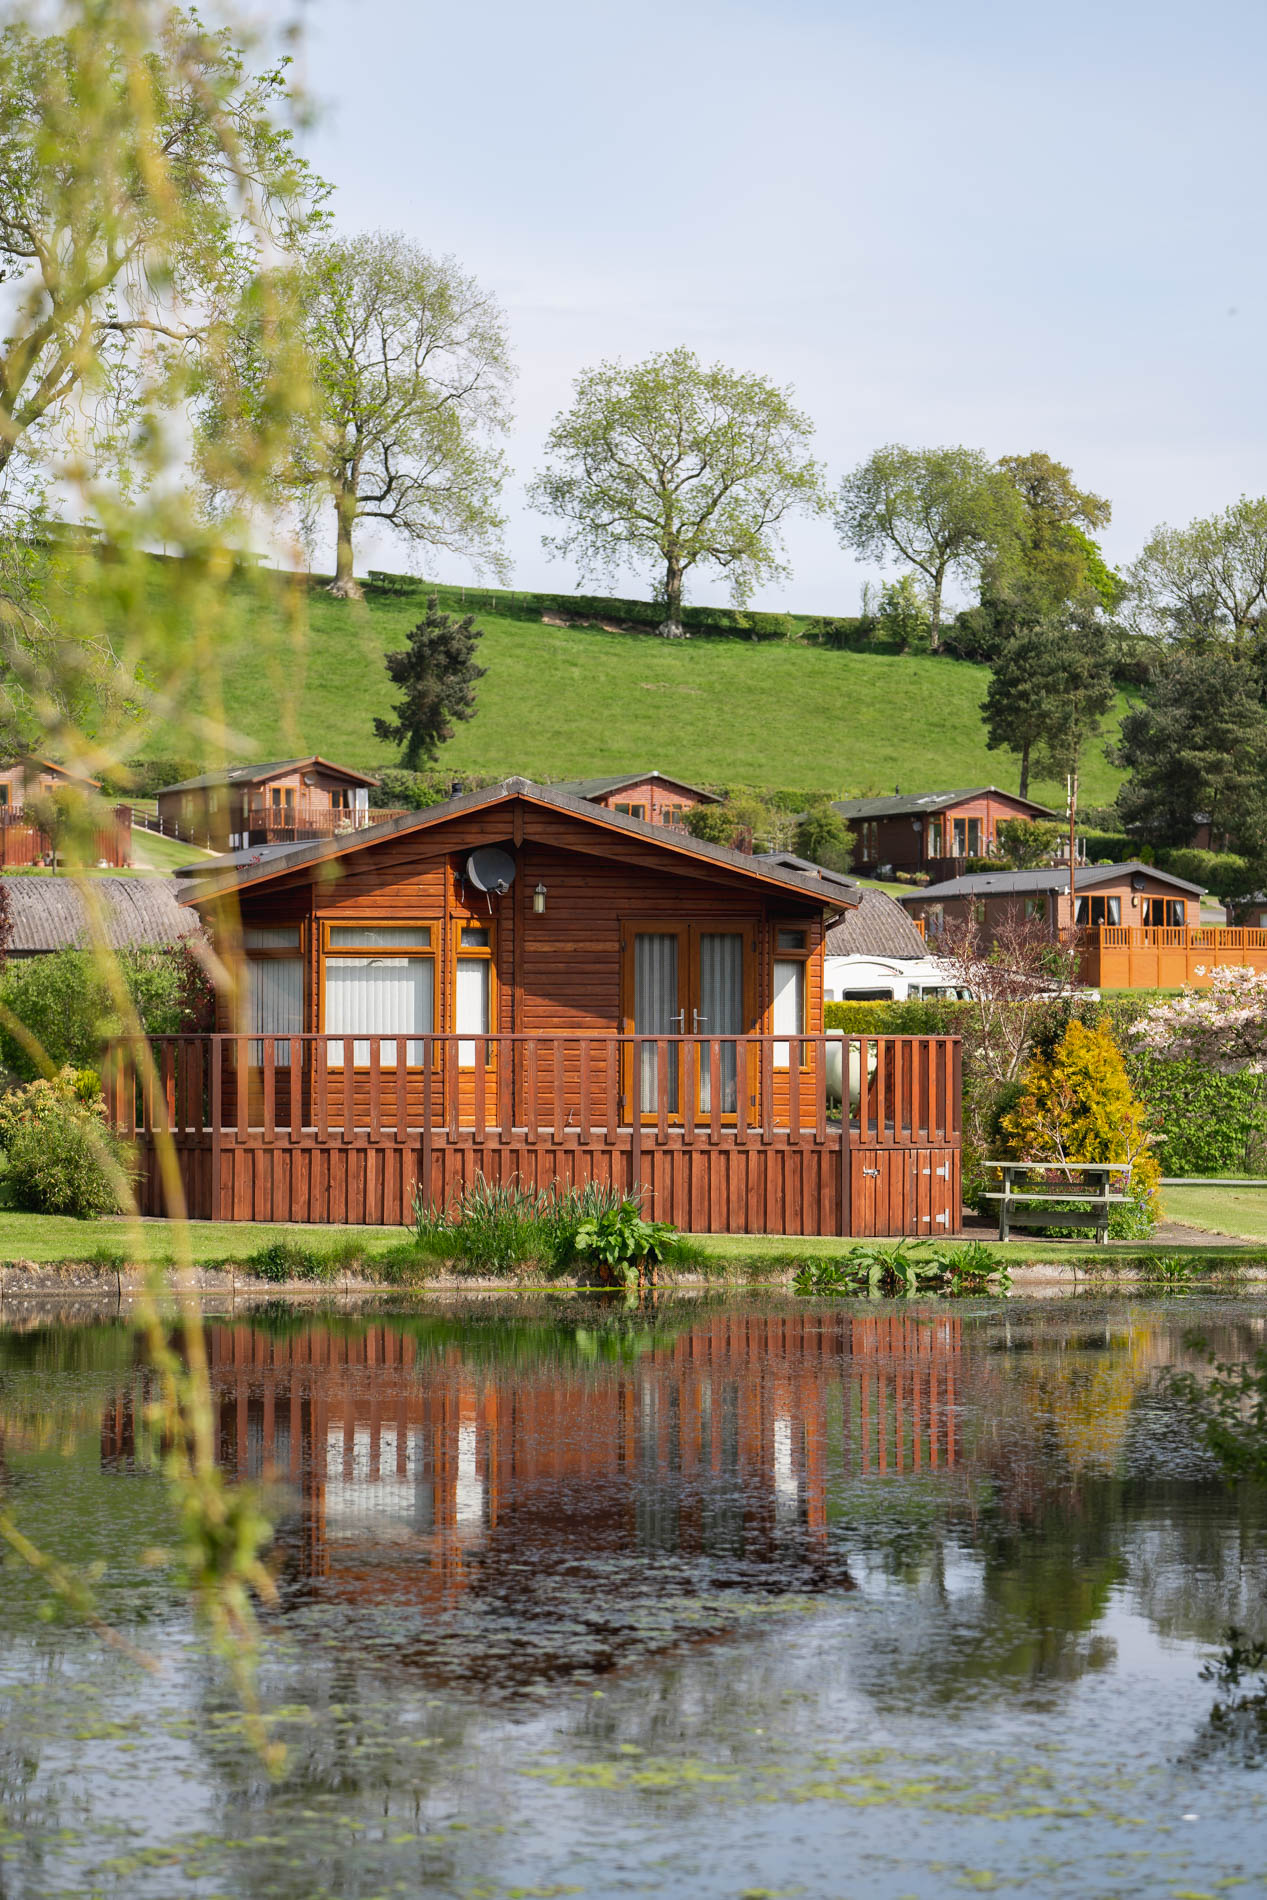 Eleven month holiday licence | Oakwood Valley Lodges